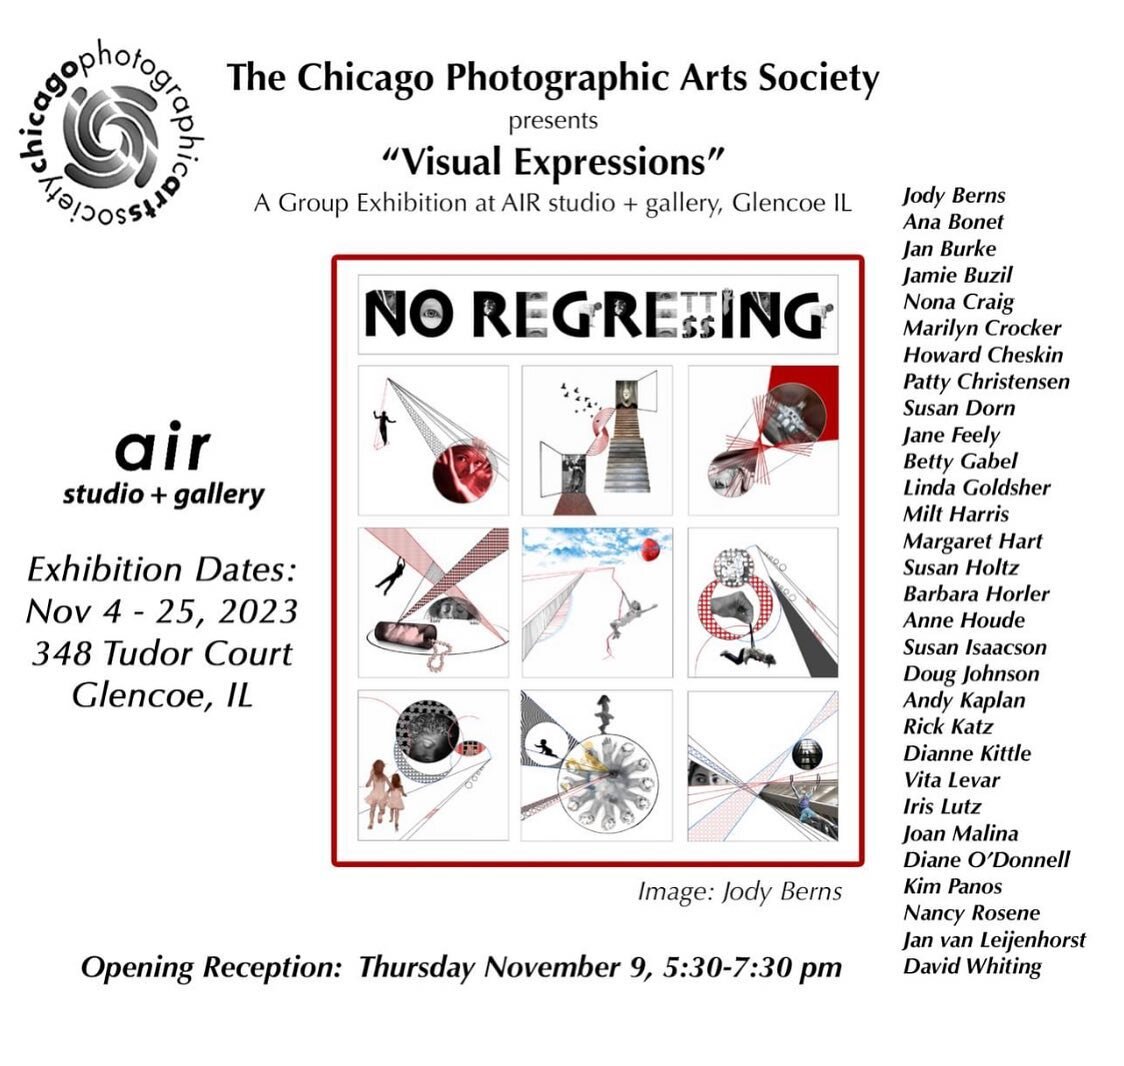 Join me at the opening reception at AIR Studio and Gallery in Glencoe November 9th from 5:30-7:30pm. The exhibit, called &quot;Visual Expressions&quot;, is a collective from Chicago Photographic Arts Society. It's a great time to stop by and meet the